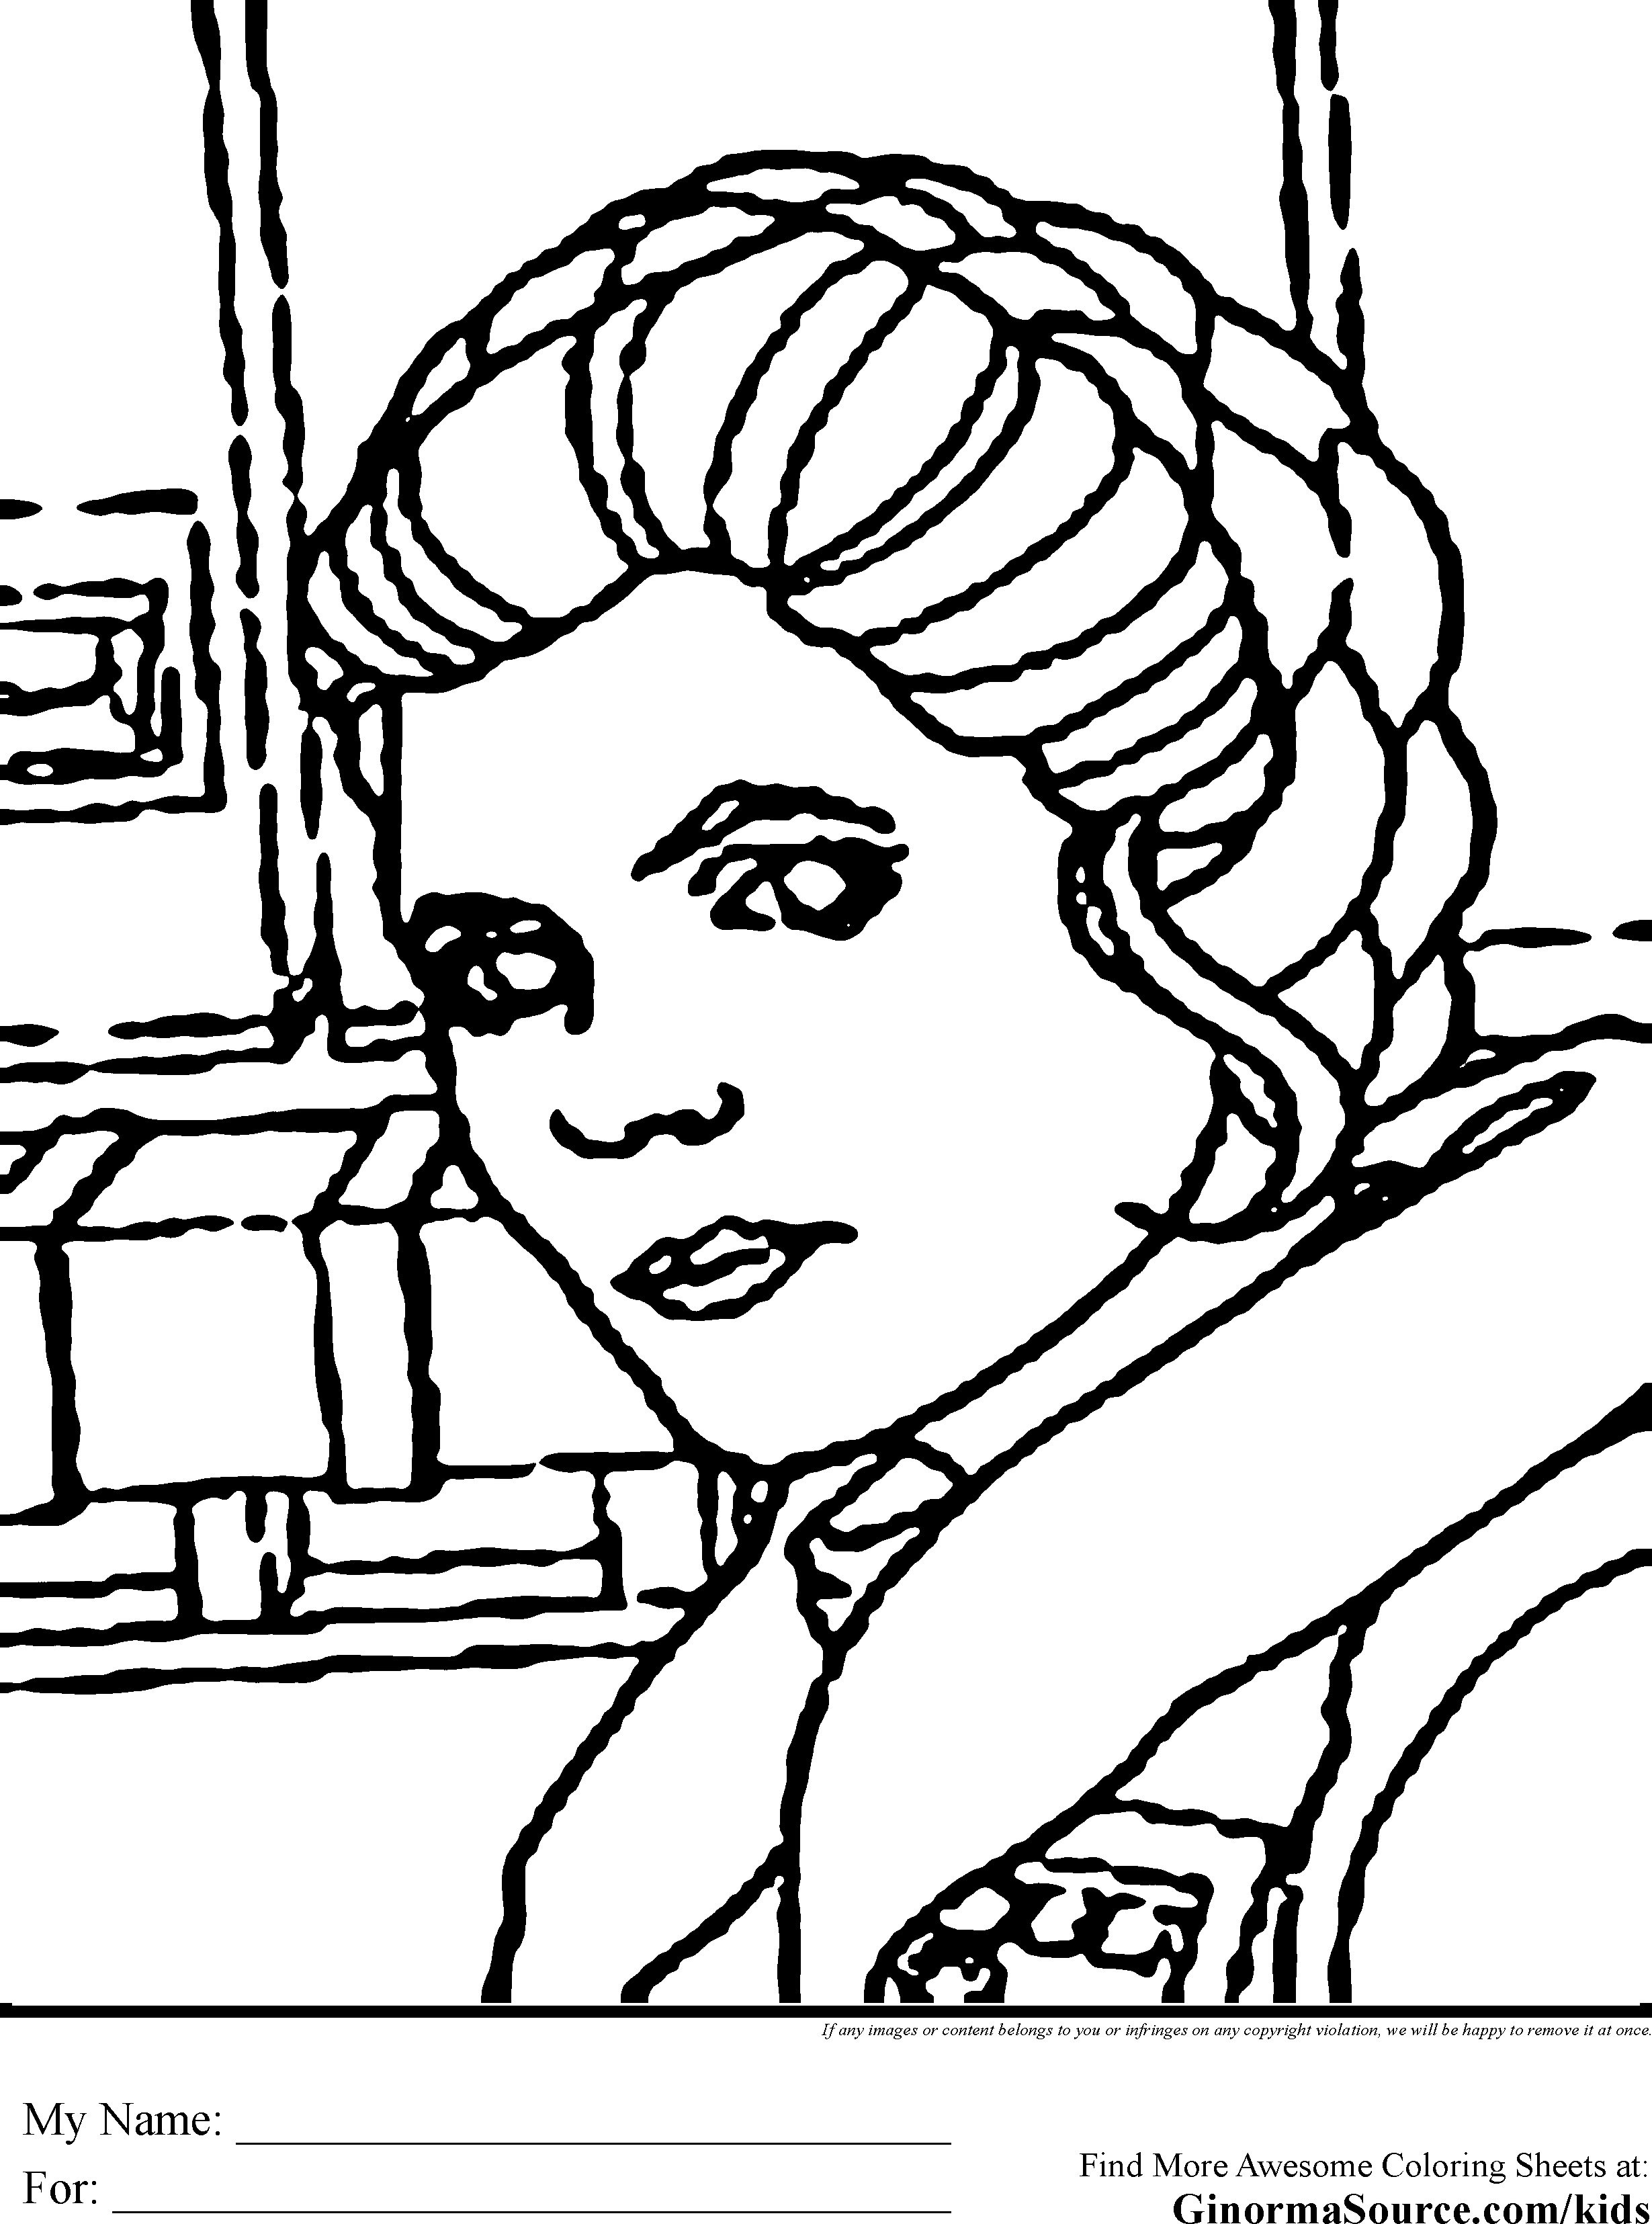 Princess Leia Coloring Pages to Print